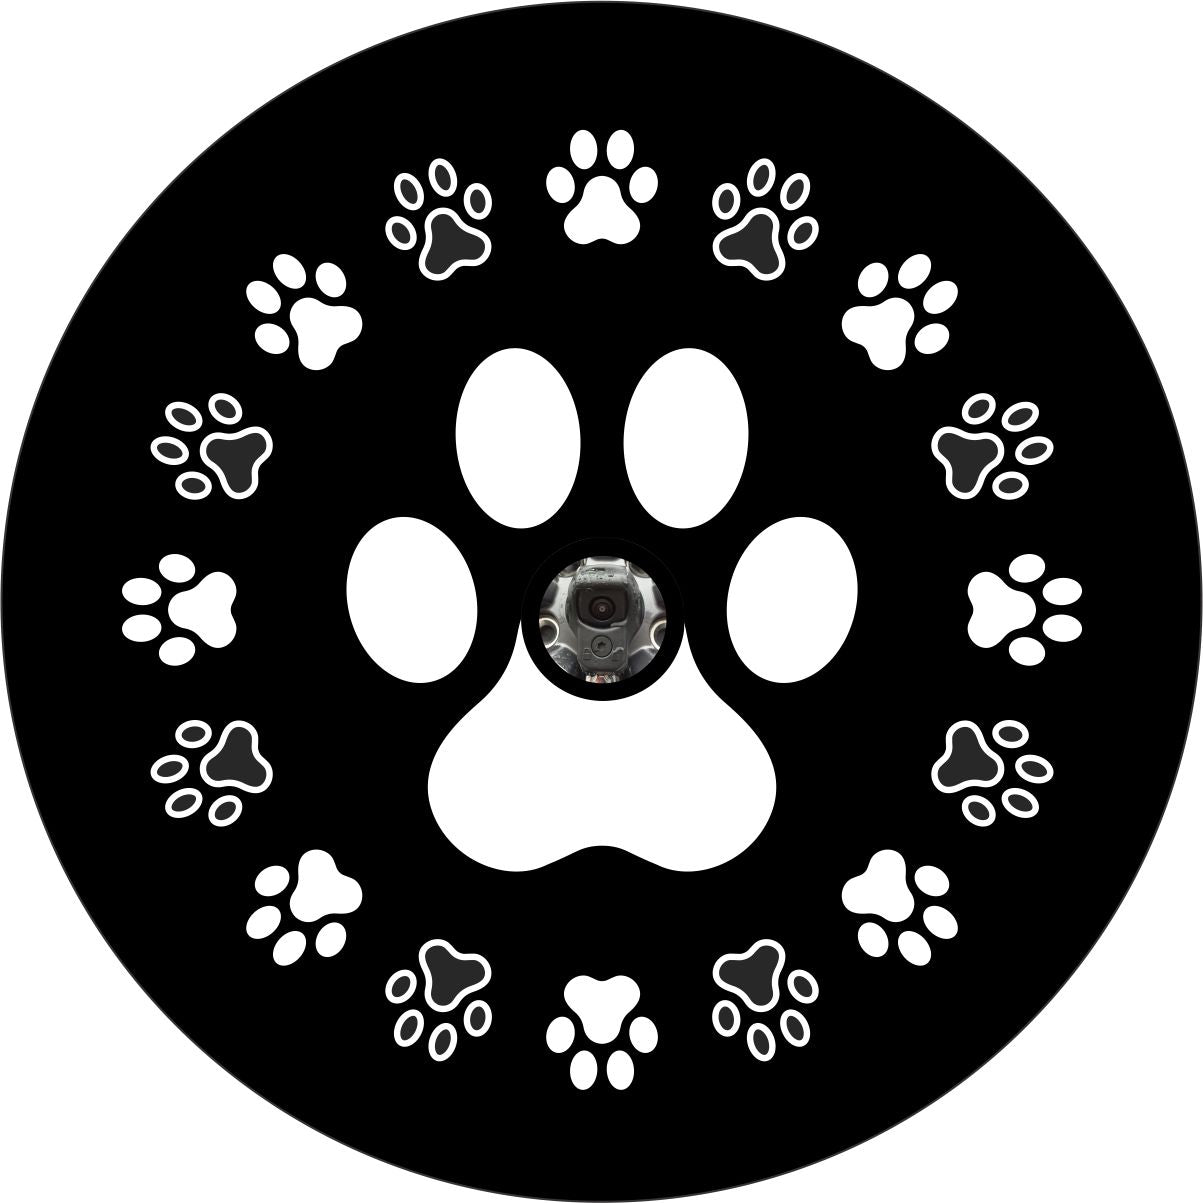 Spare tire cover design of a wreath of dog paws or a circle of small dog paws around one large dog paw with a hole for a backup camera